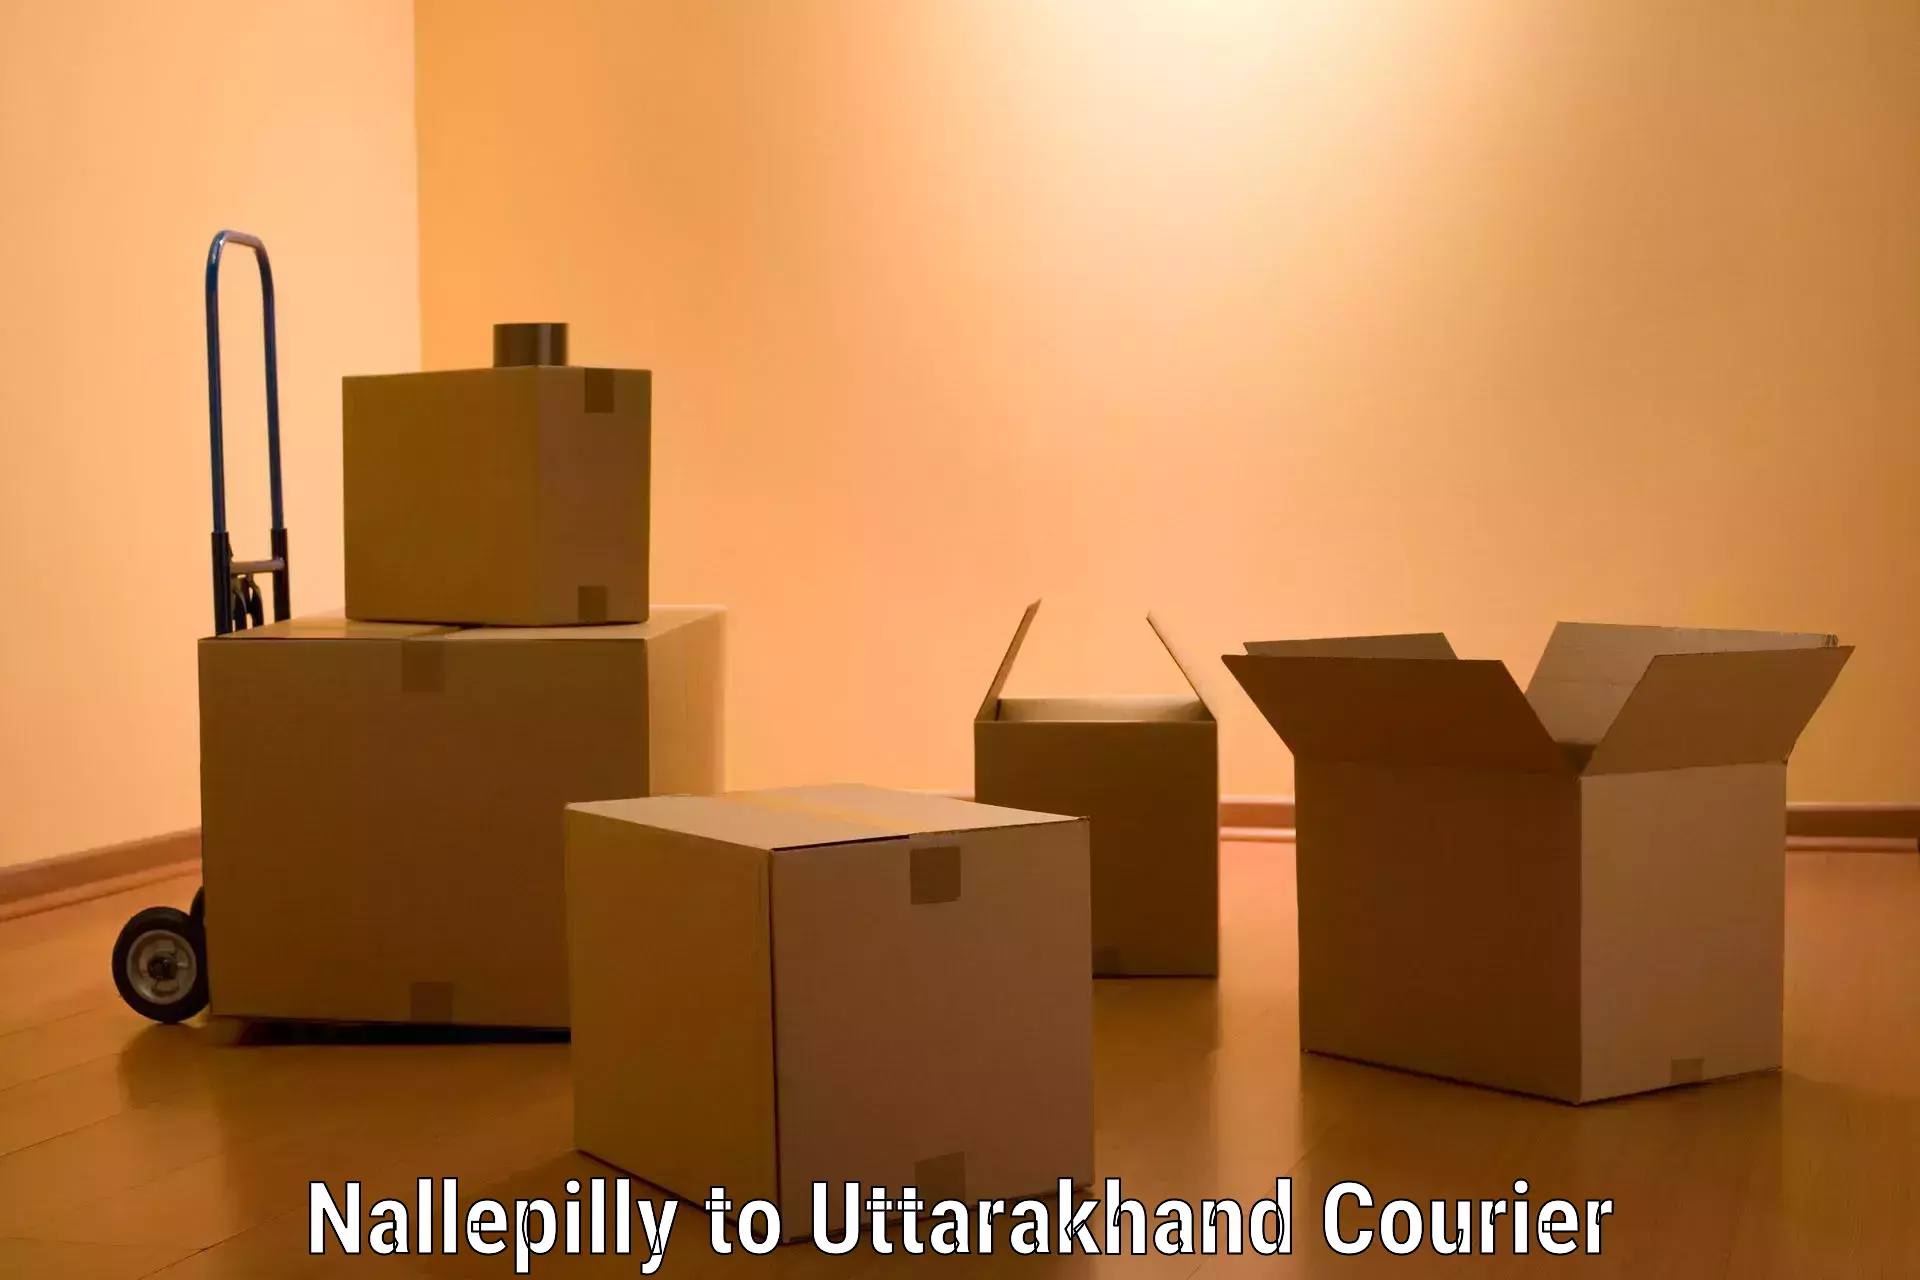 Moving and packing experts Nallepilly to Lansdowne